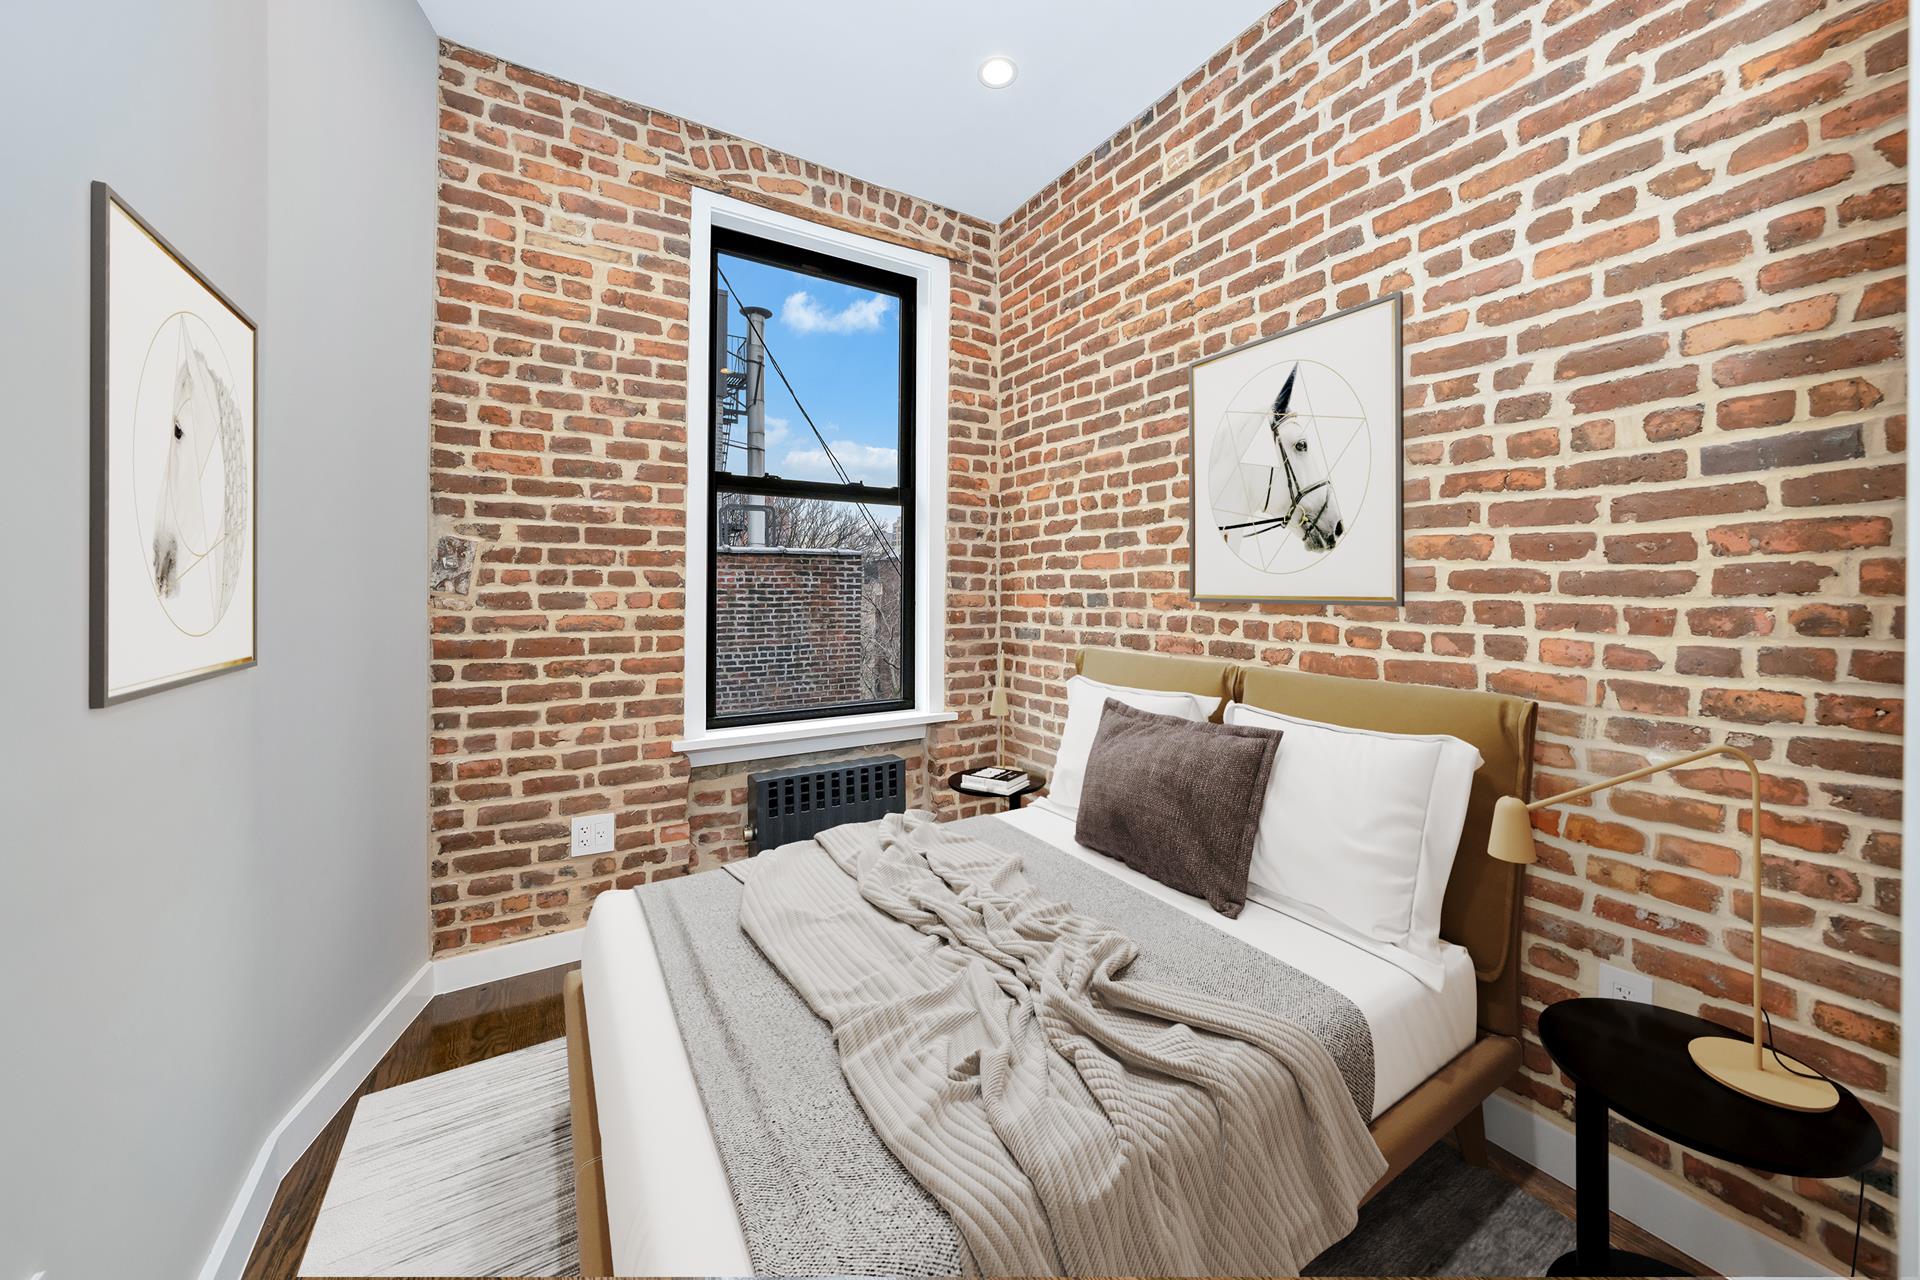 228 8th Avenue 20, Chelsea, Downtown, NYC - 5 Bedrooms  
2 Bathrooms  
8 Rooms - 